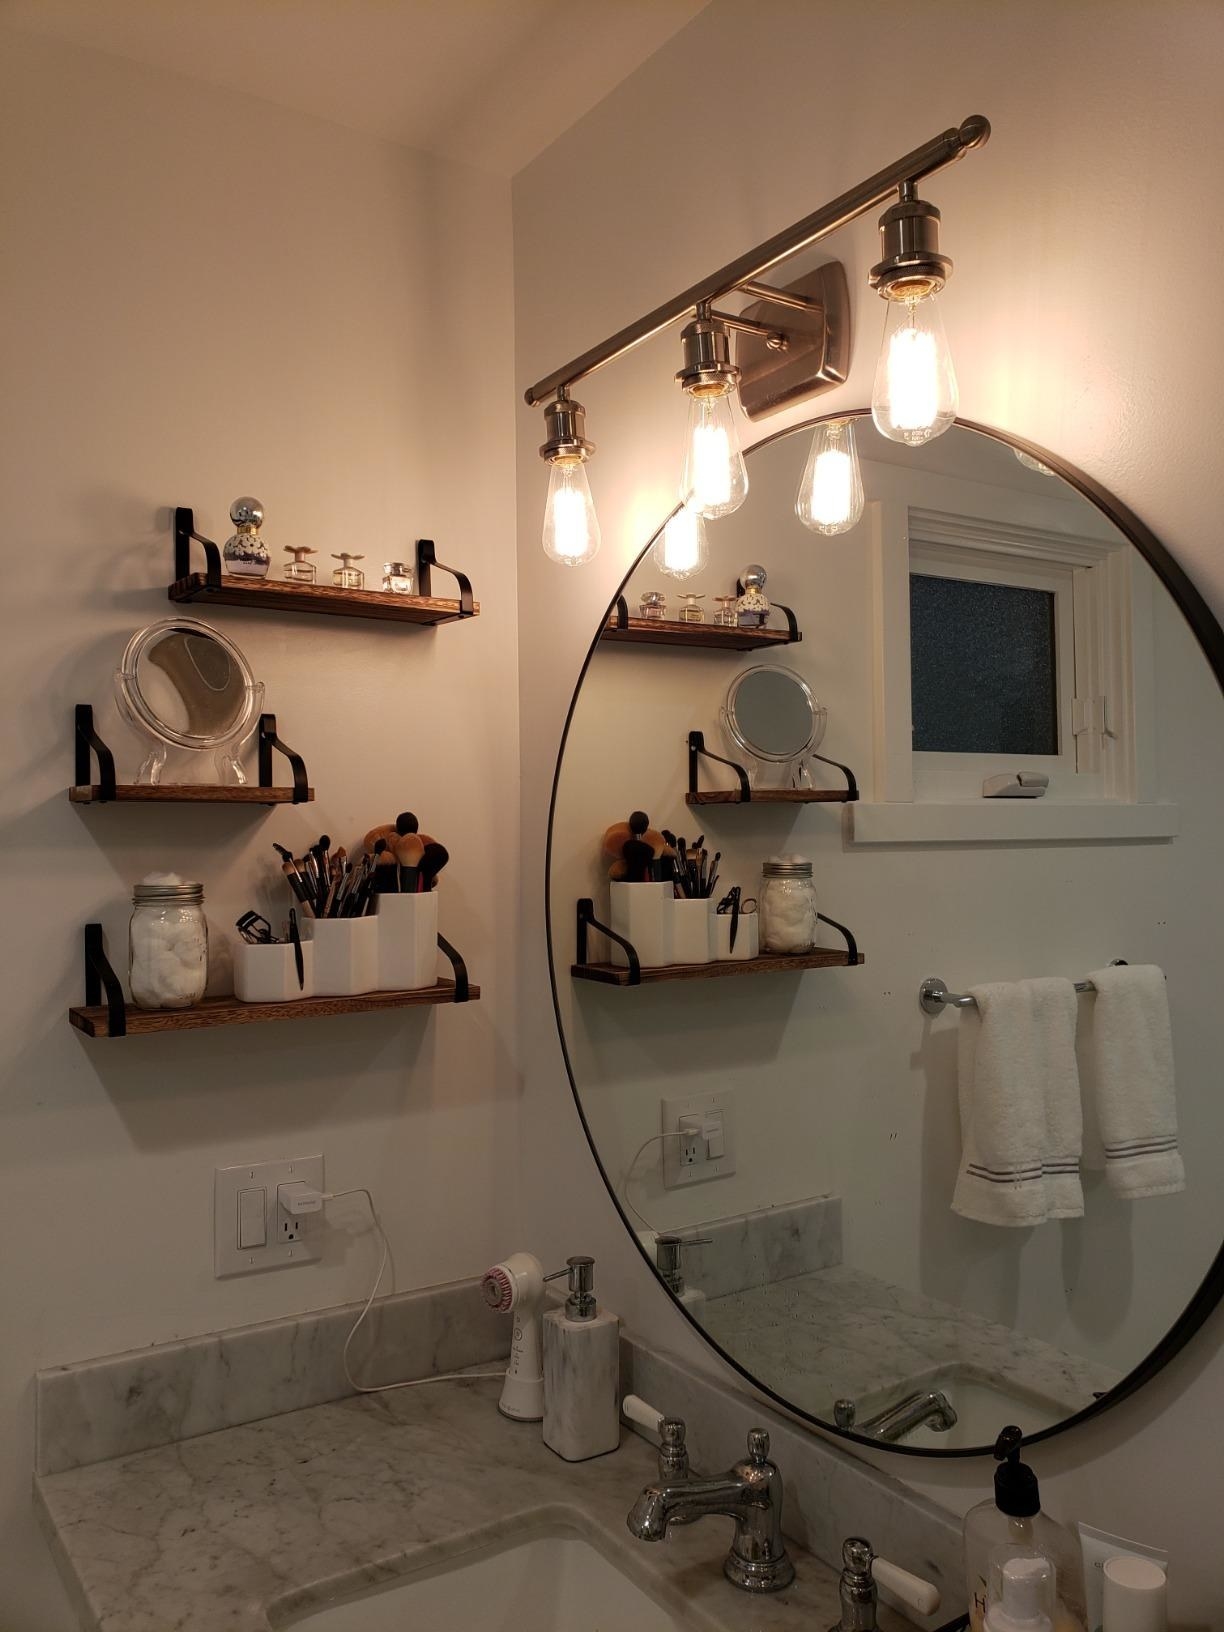 Reviewer image of shelves in bathroom